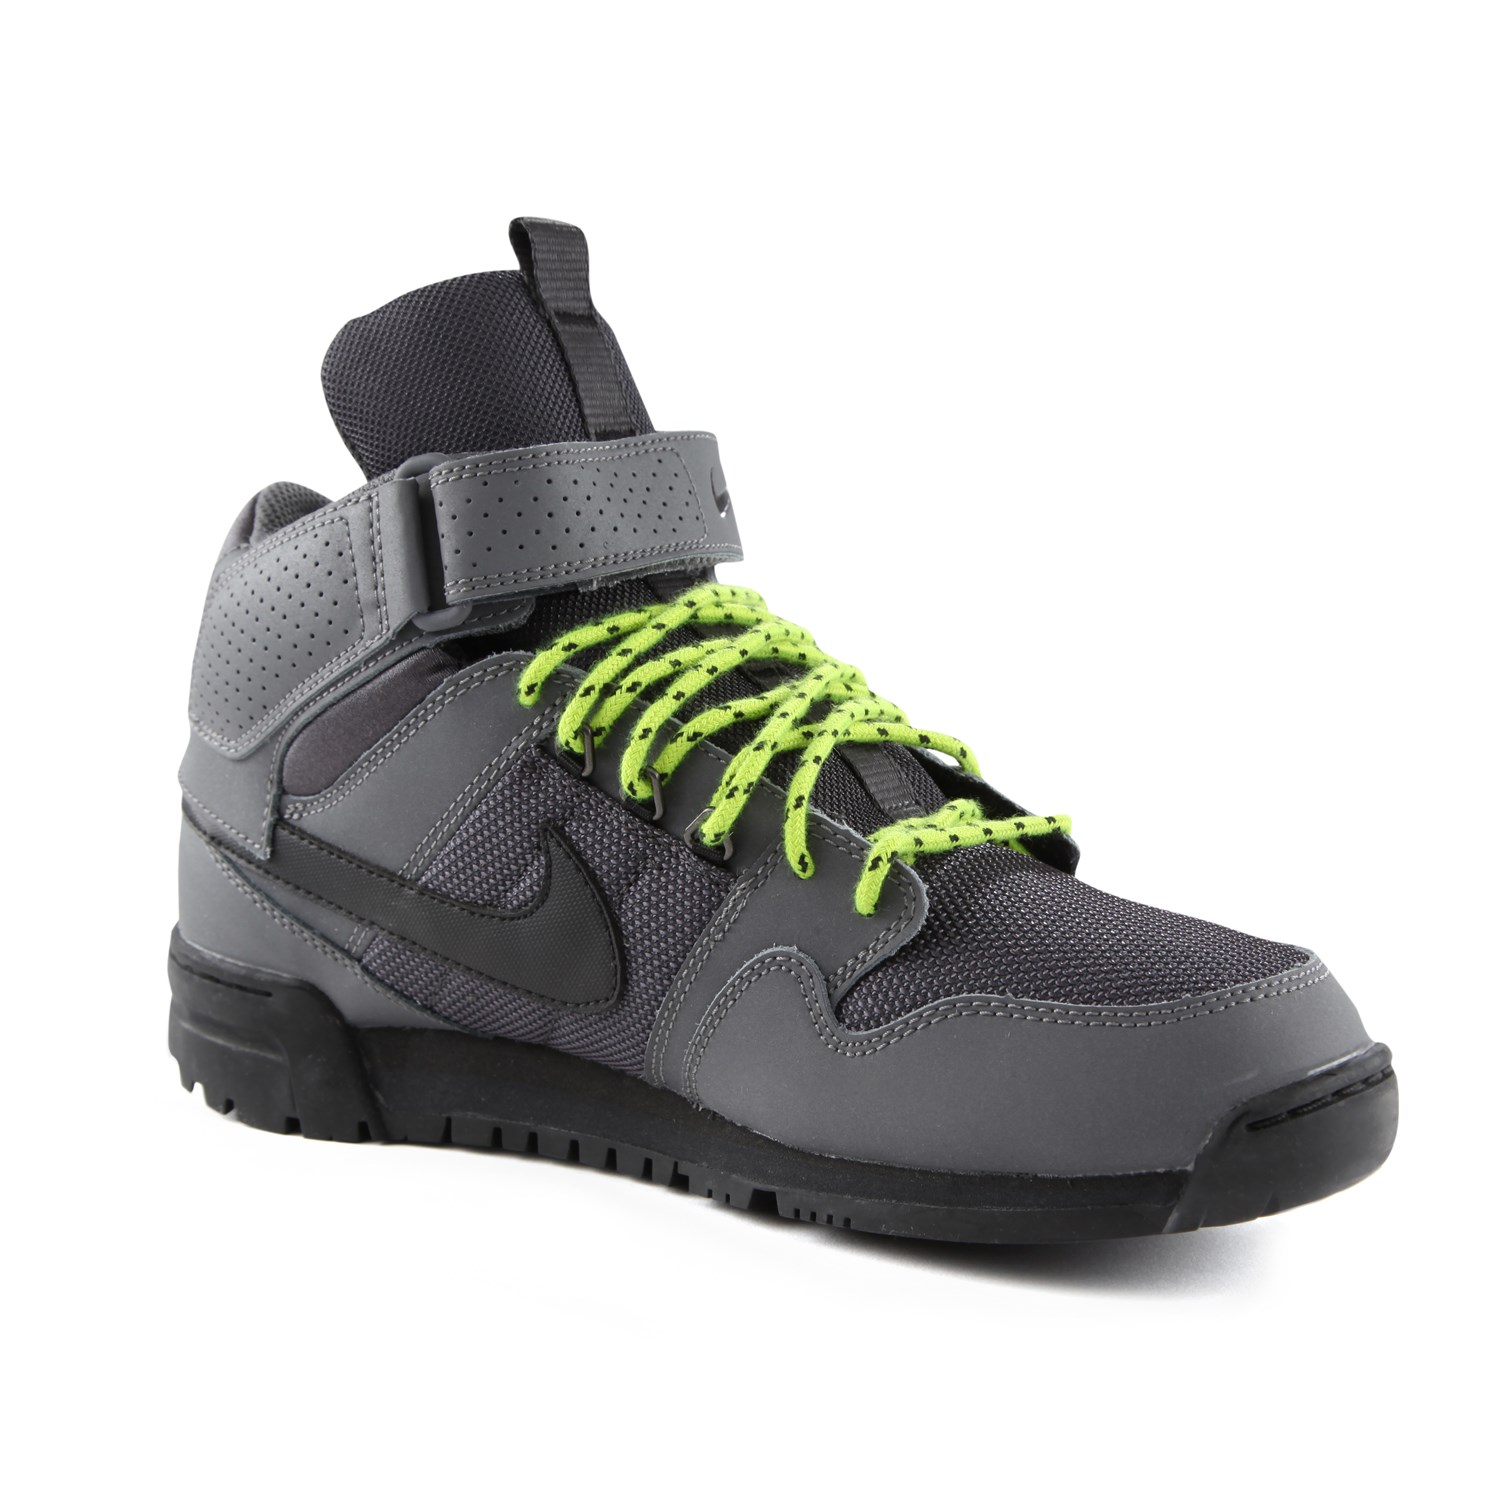 Nike Mogan Mid 2 OMS Shoes |